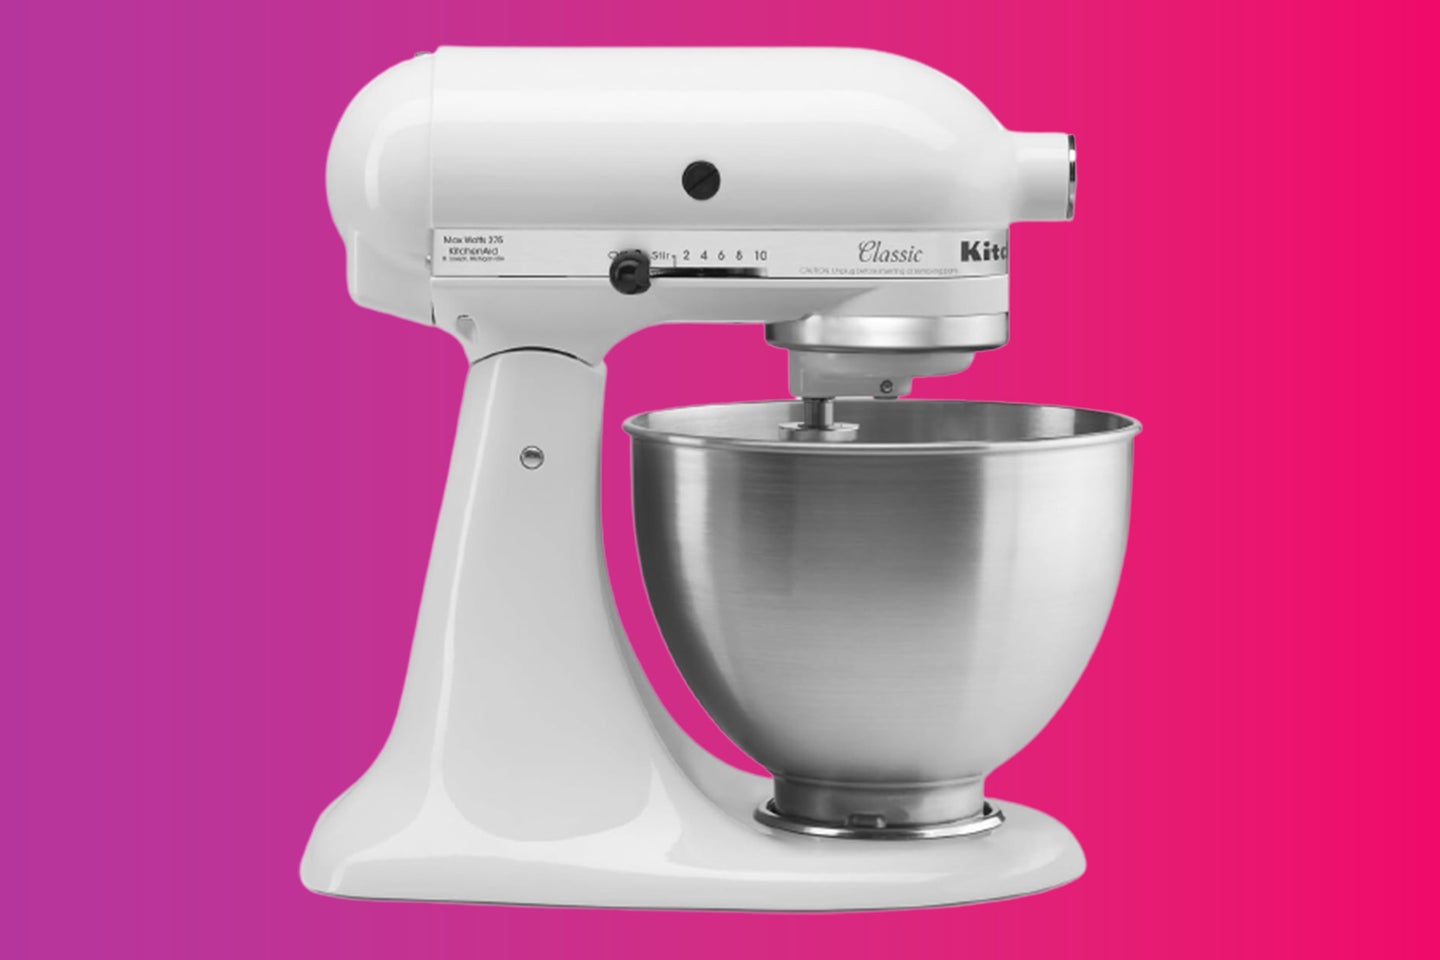 A white KitchenAid mixer on a purple and red gradient background